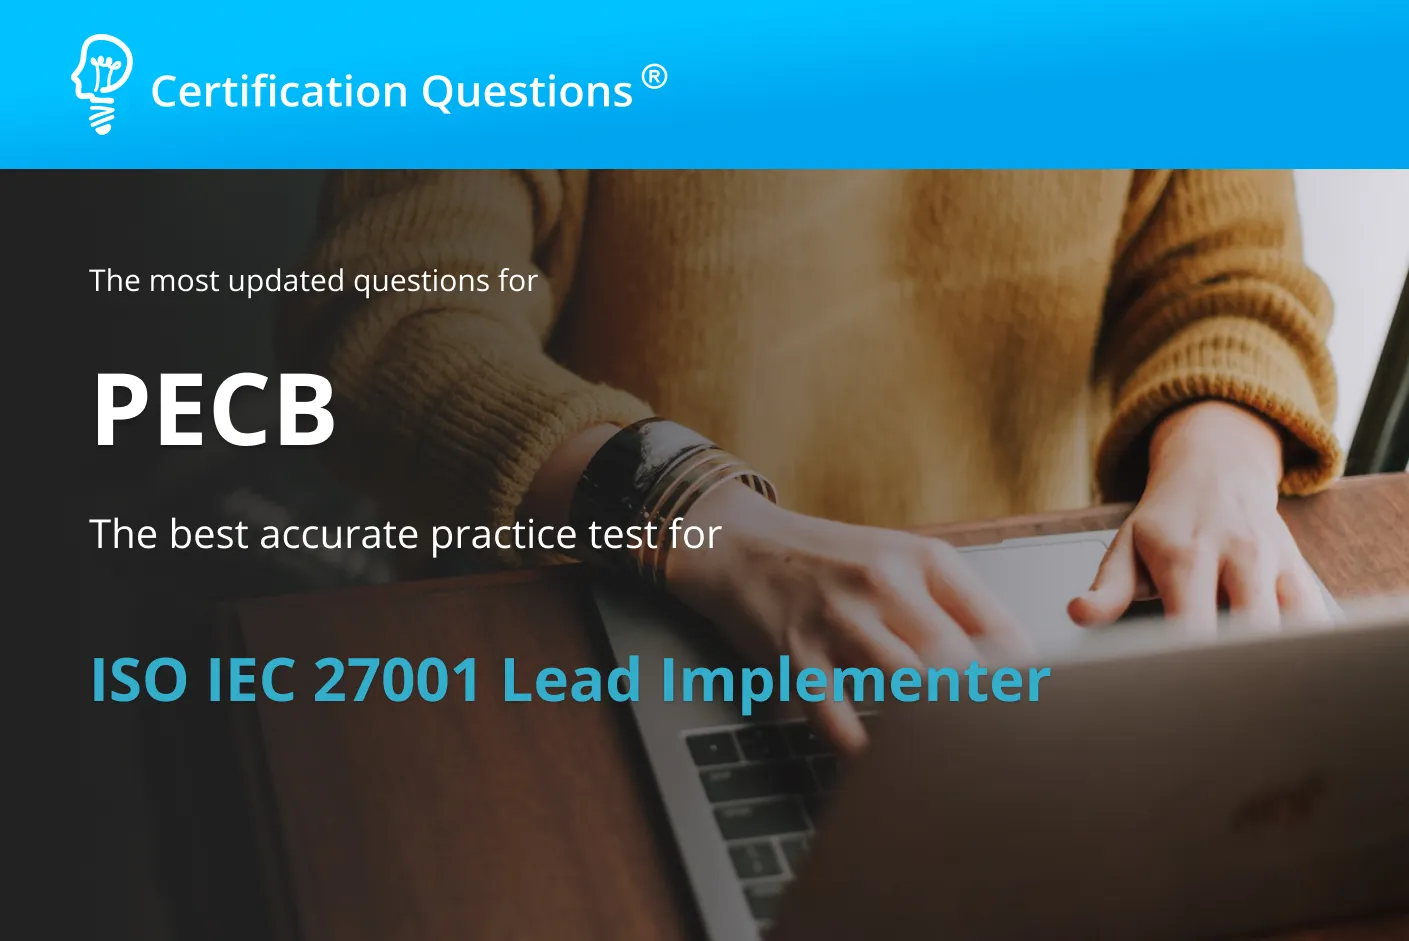 This image represents the ISO IEC-27001 Lead Implementer Exam